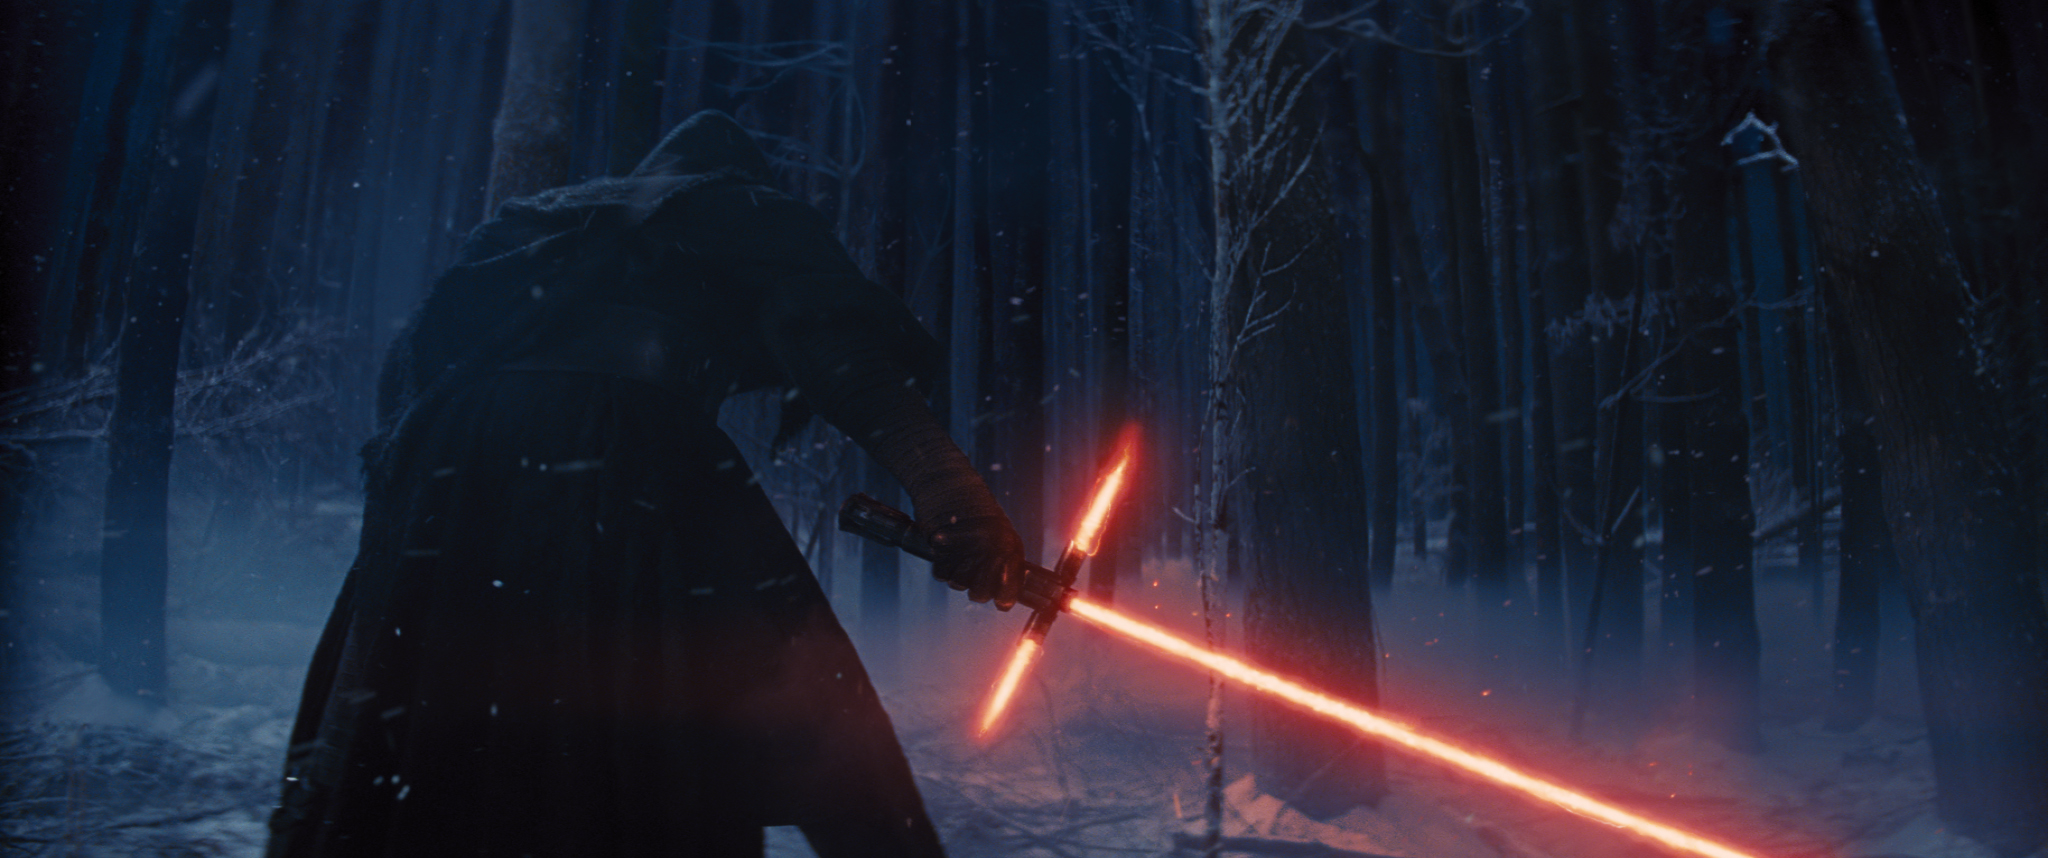 High Res Images Released From STAR WARS THE FORCE AWAKENS